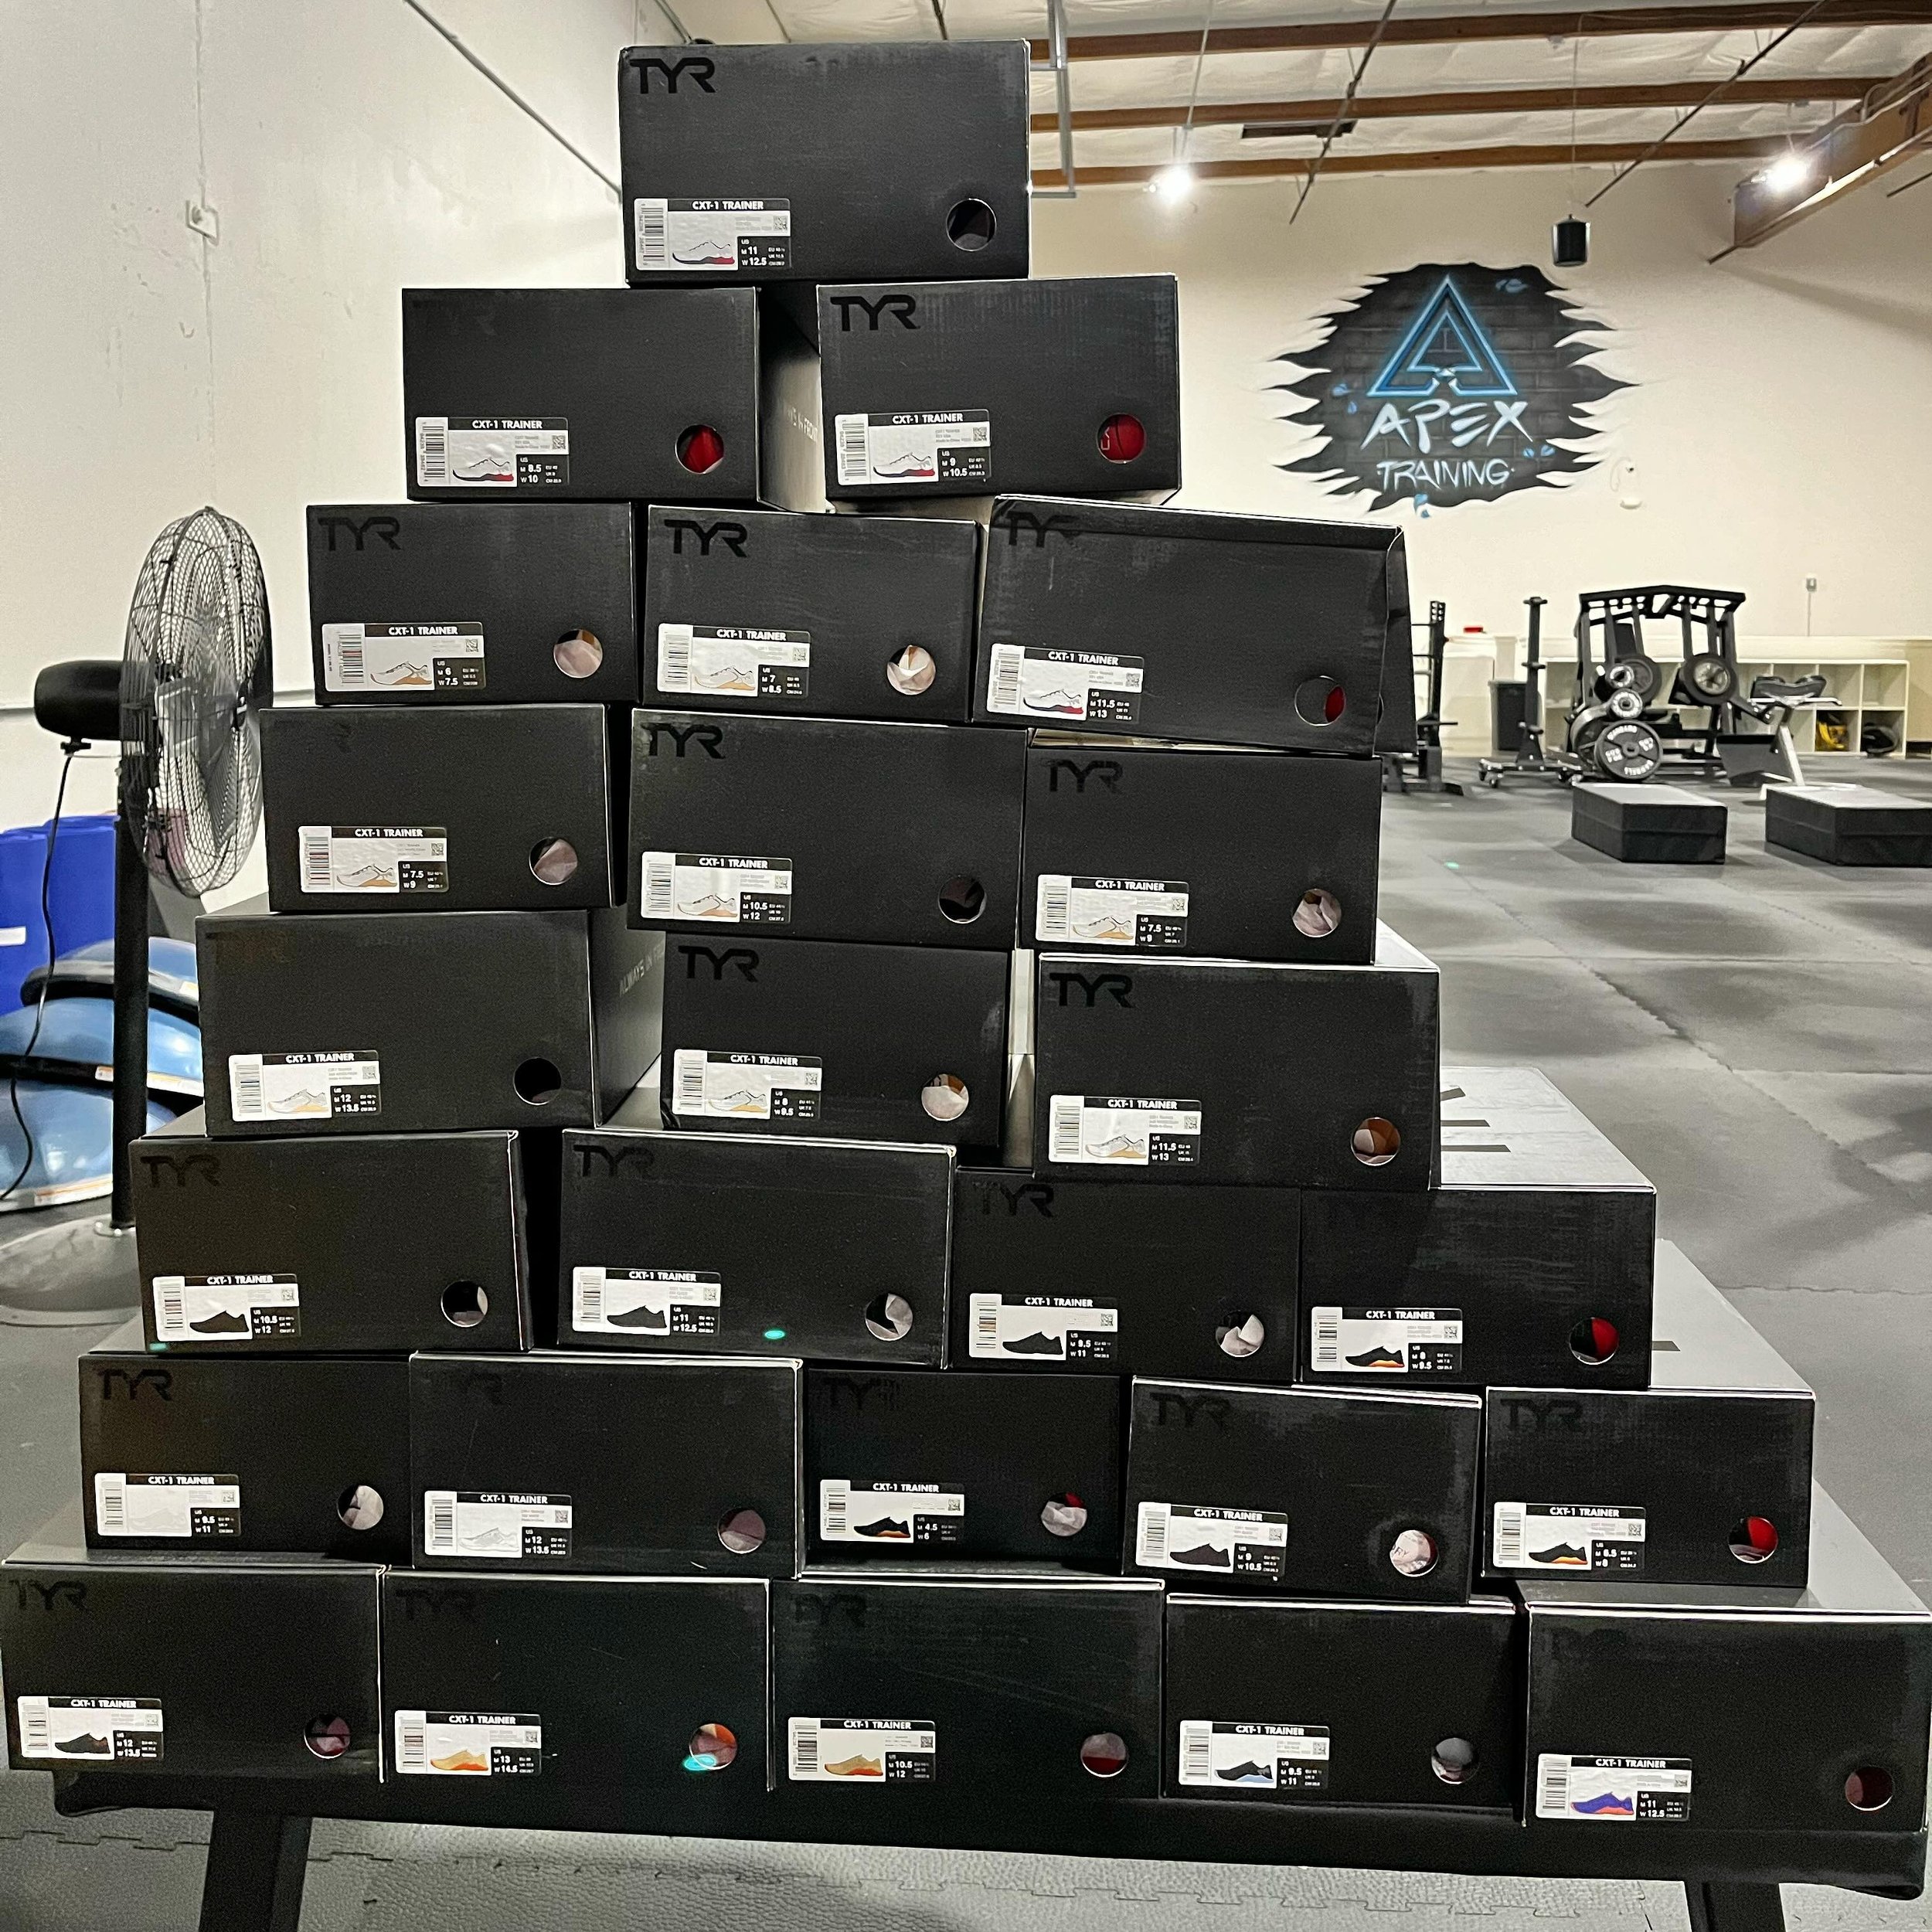 👟🔝 Stepping up our game with this shoe pyramid! 💪 We&rsquo;re so lucky to be partnered with @tyrsport, providing our athletes with top-notch gear from one of the world&rsquo;s top fitness brands. 👟🌟 We also believe in the power of a matchy-match